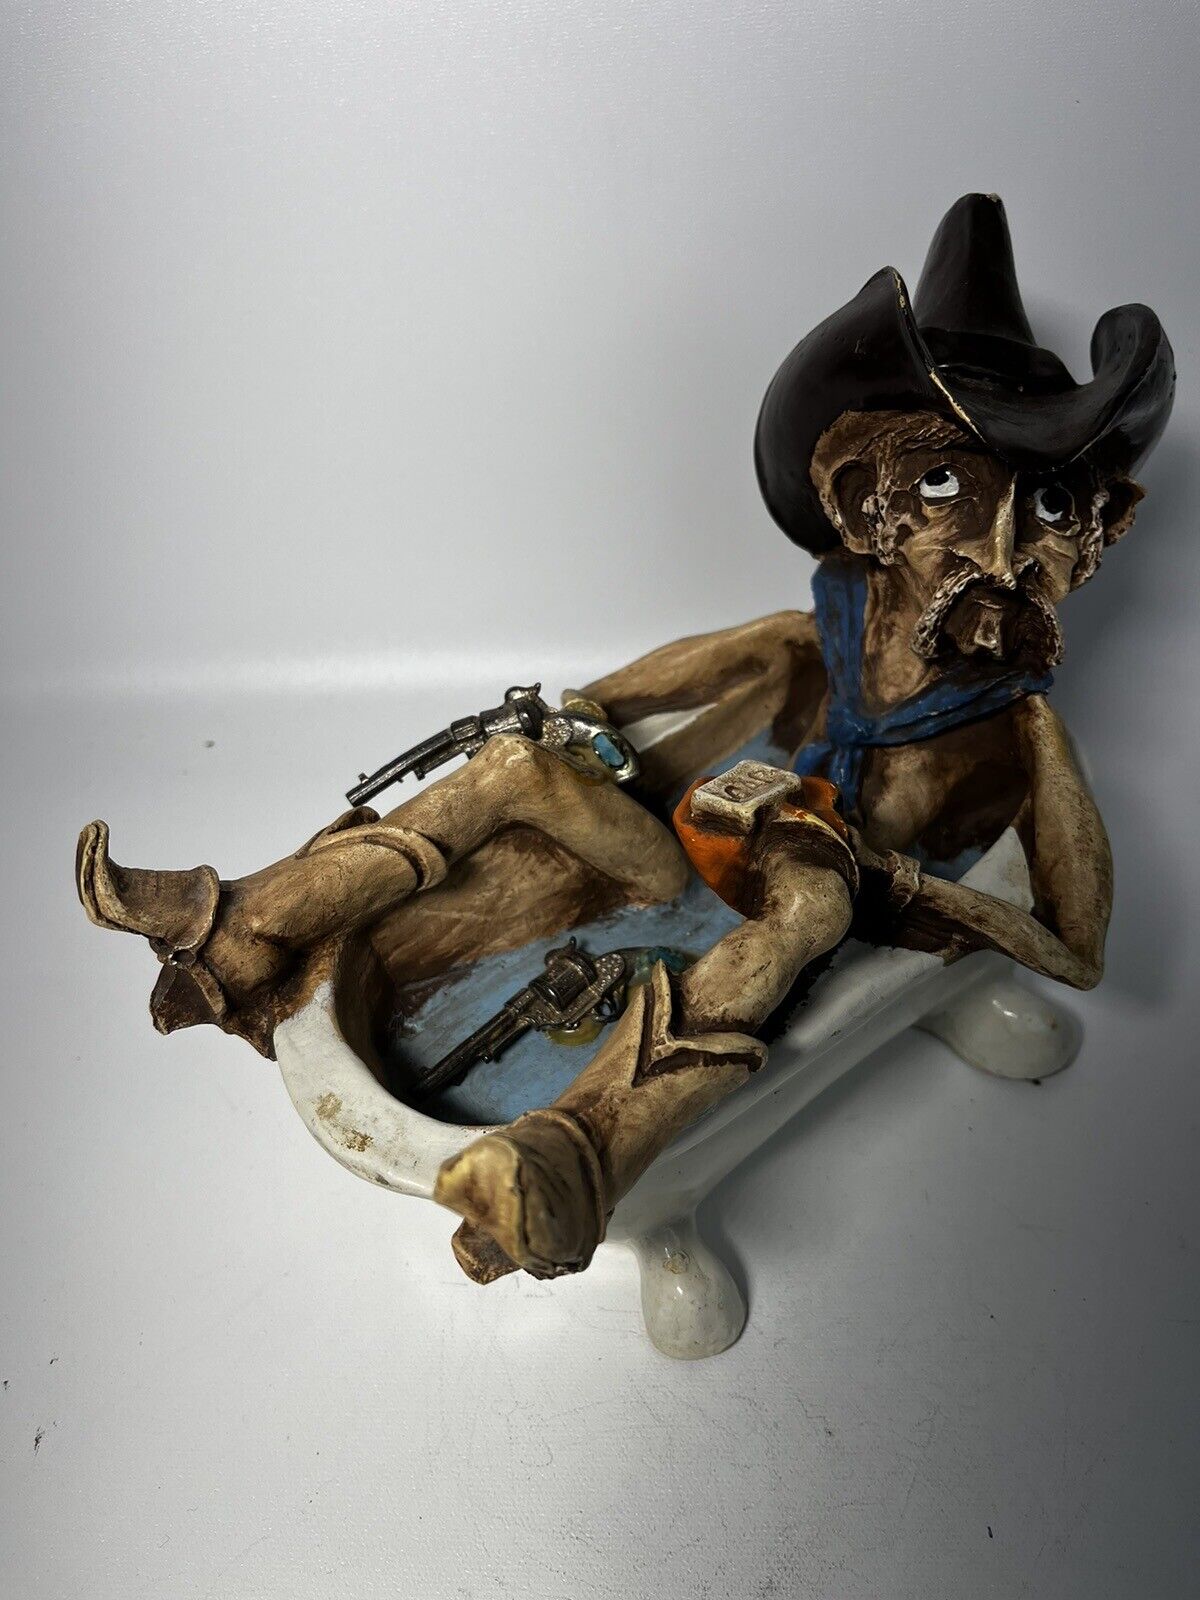 1985 Shade Tree Creations Inc. Customized Cowboy In Tub With Six Shooters